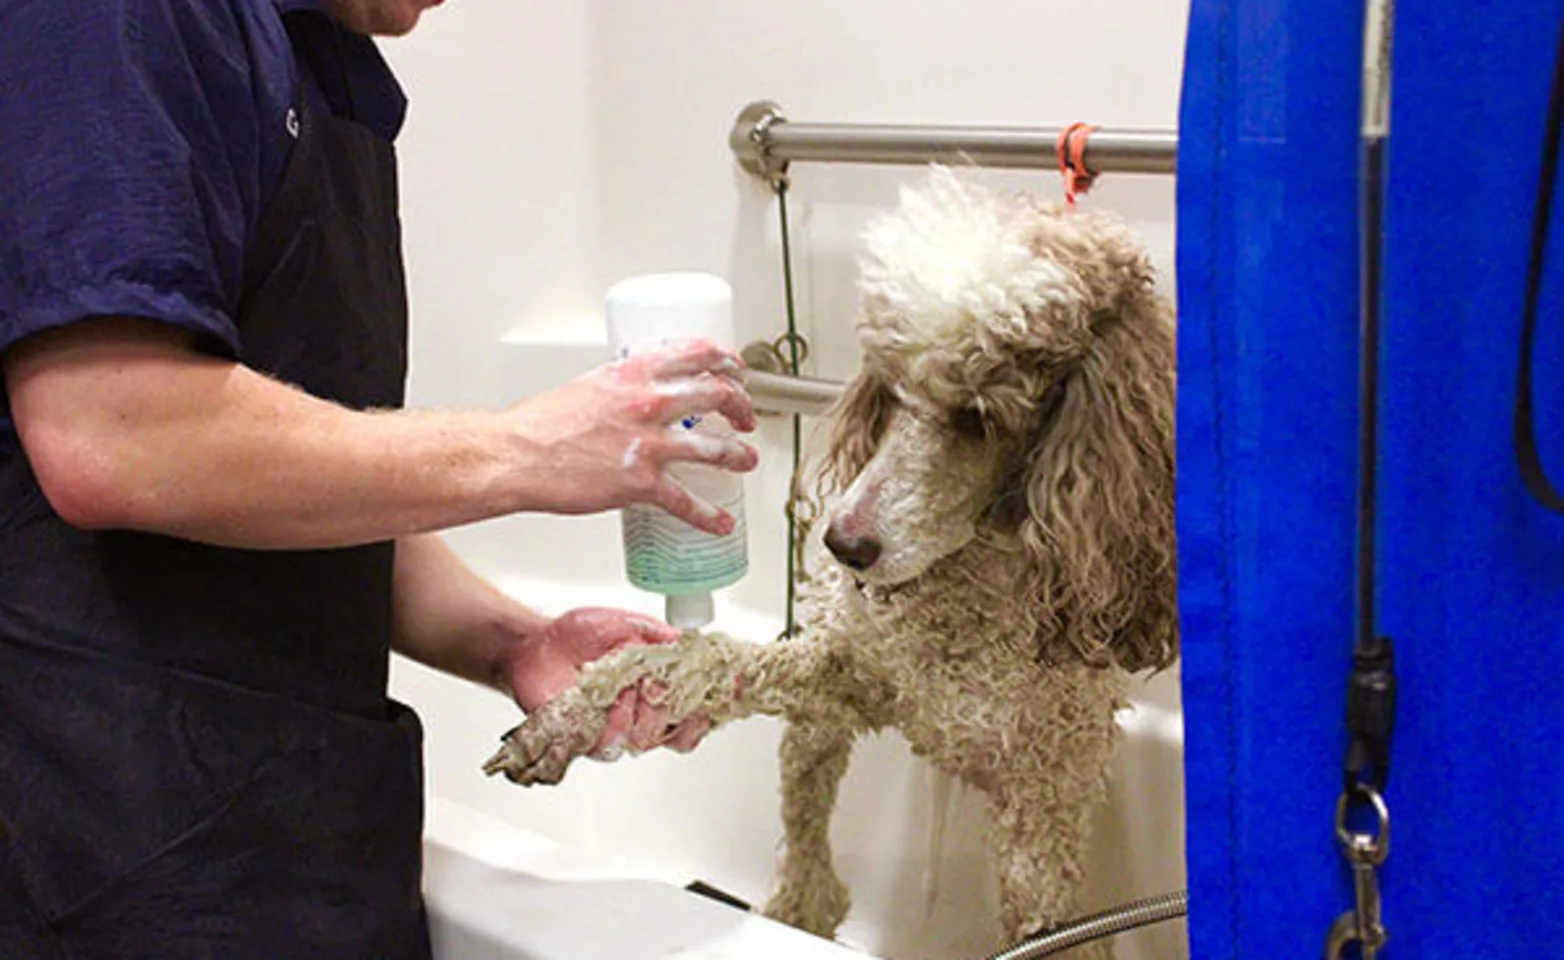 A dog getting bathed at Conejo Valley Veterinary Hospital